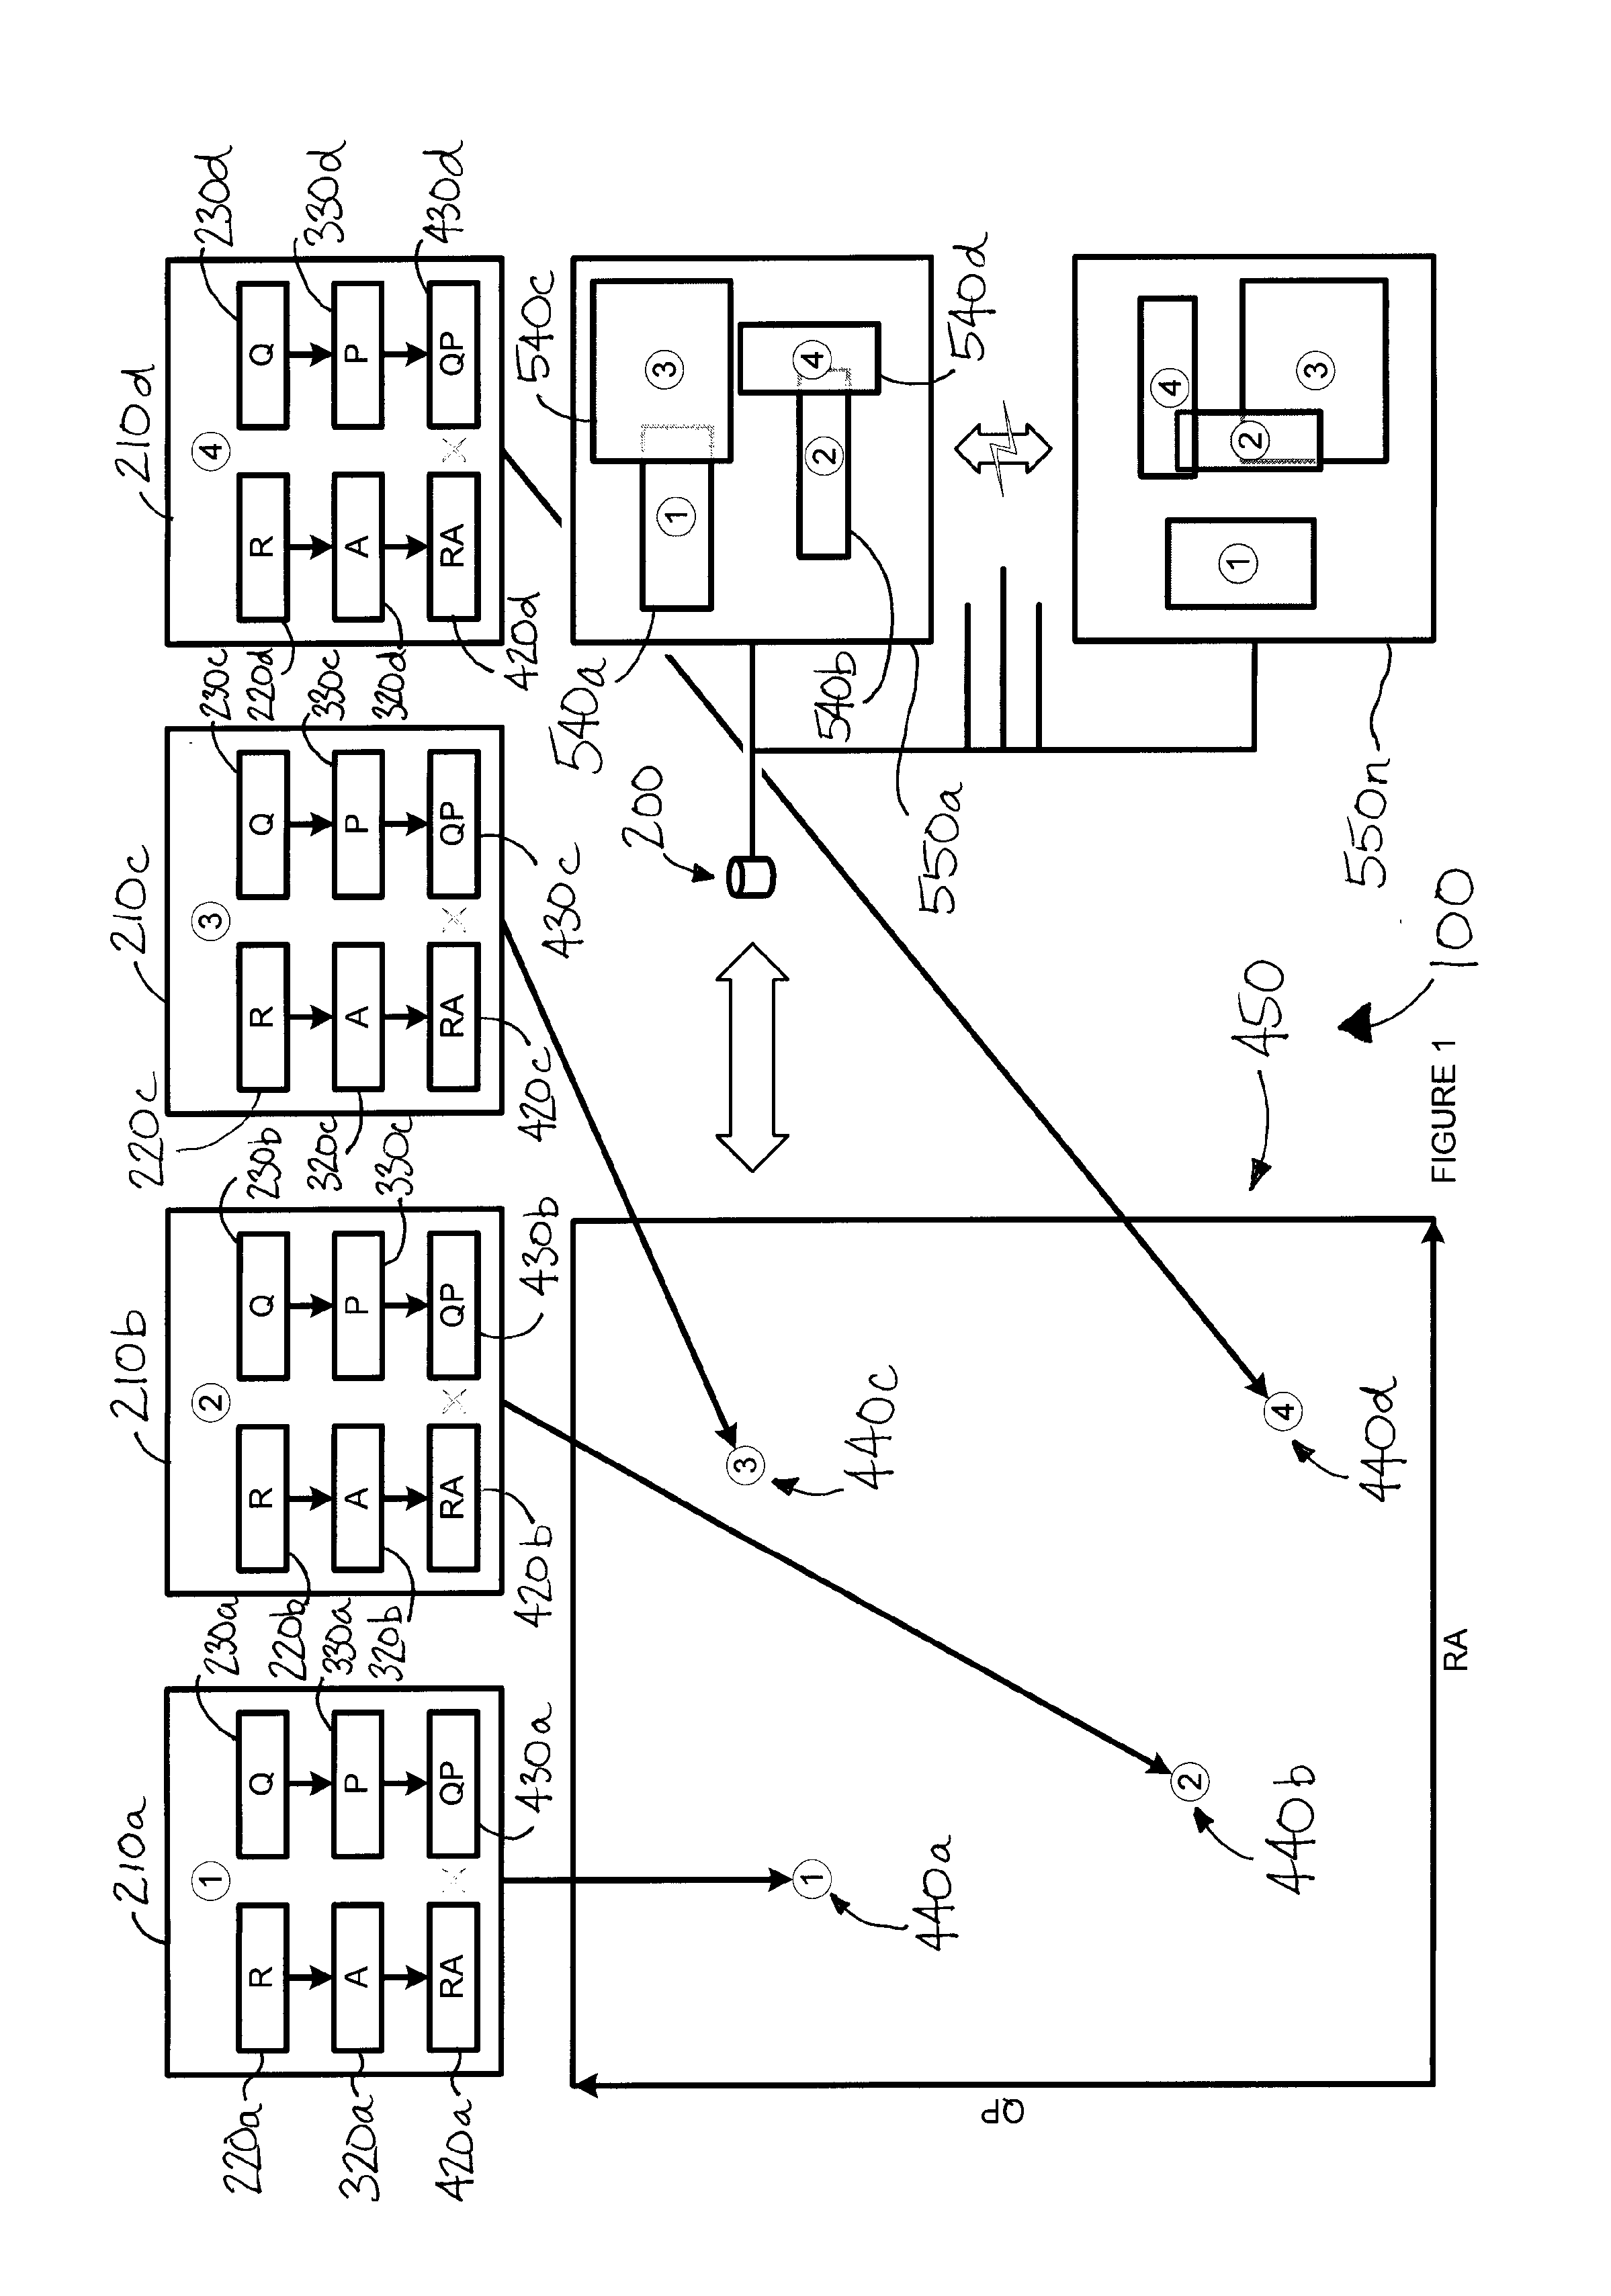 Virtual diagnostic test panel device, system, method and computer readable medium